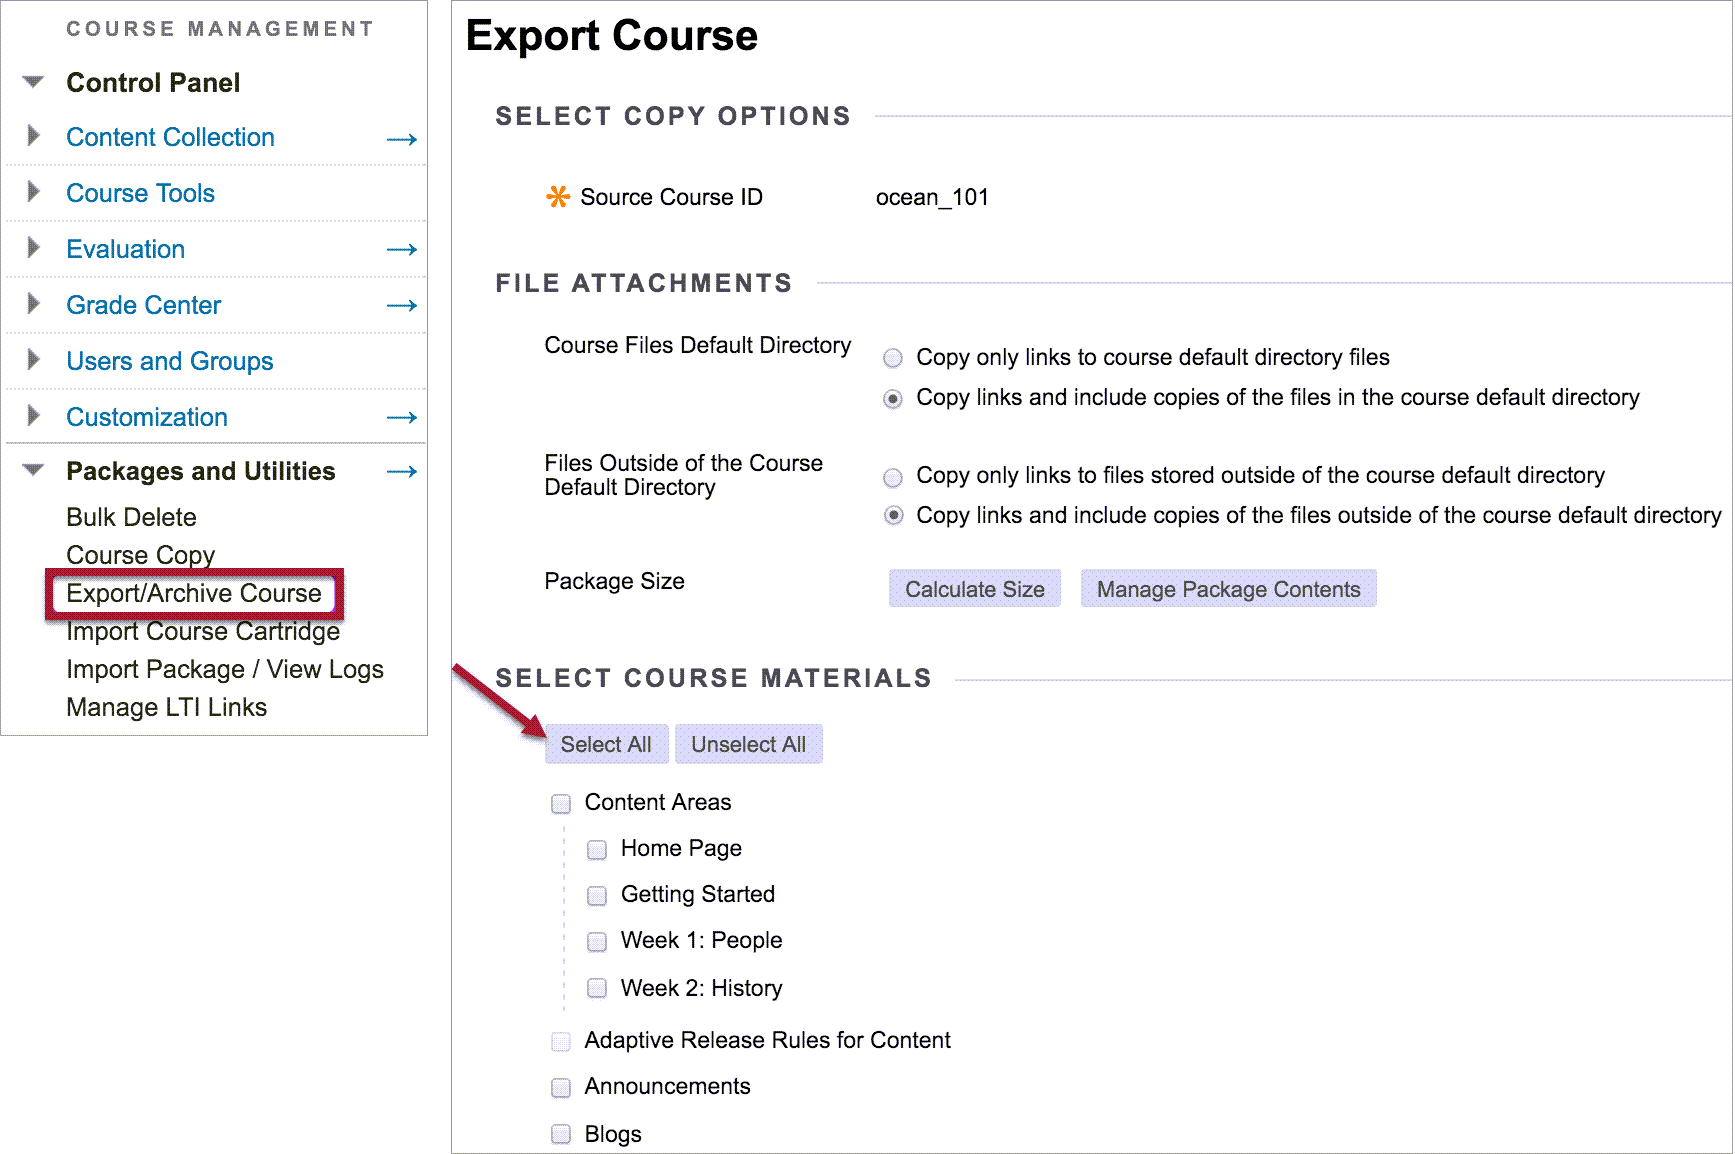 Export course and choose select all content 